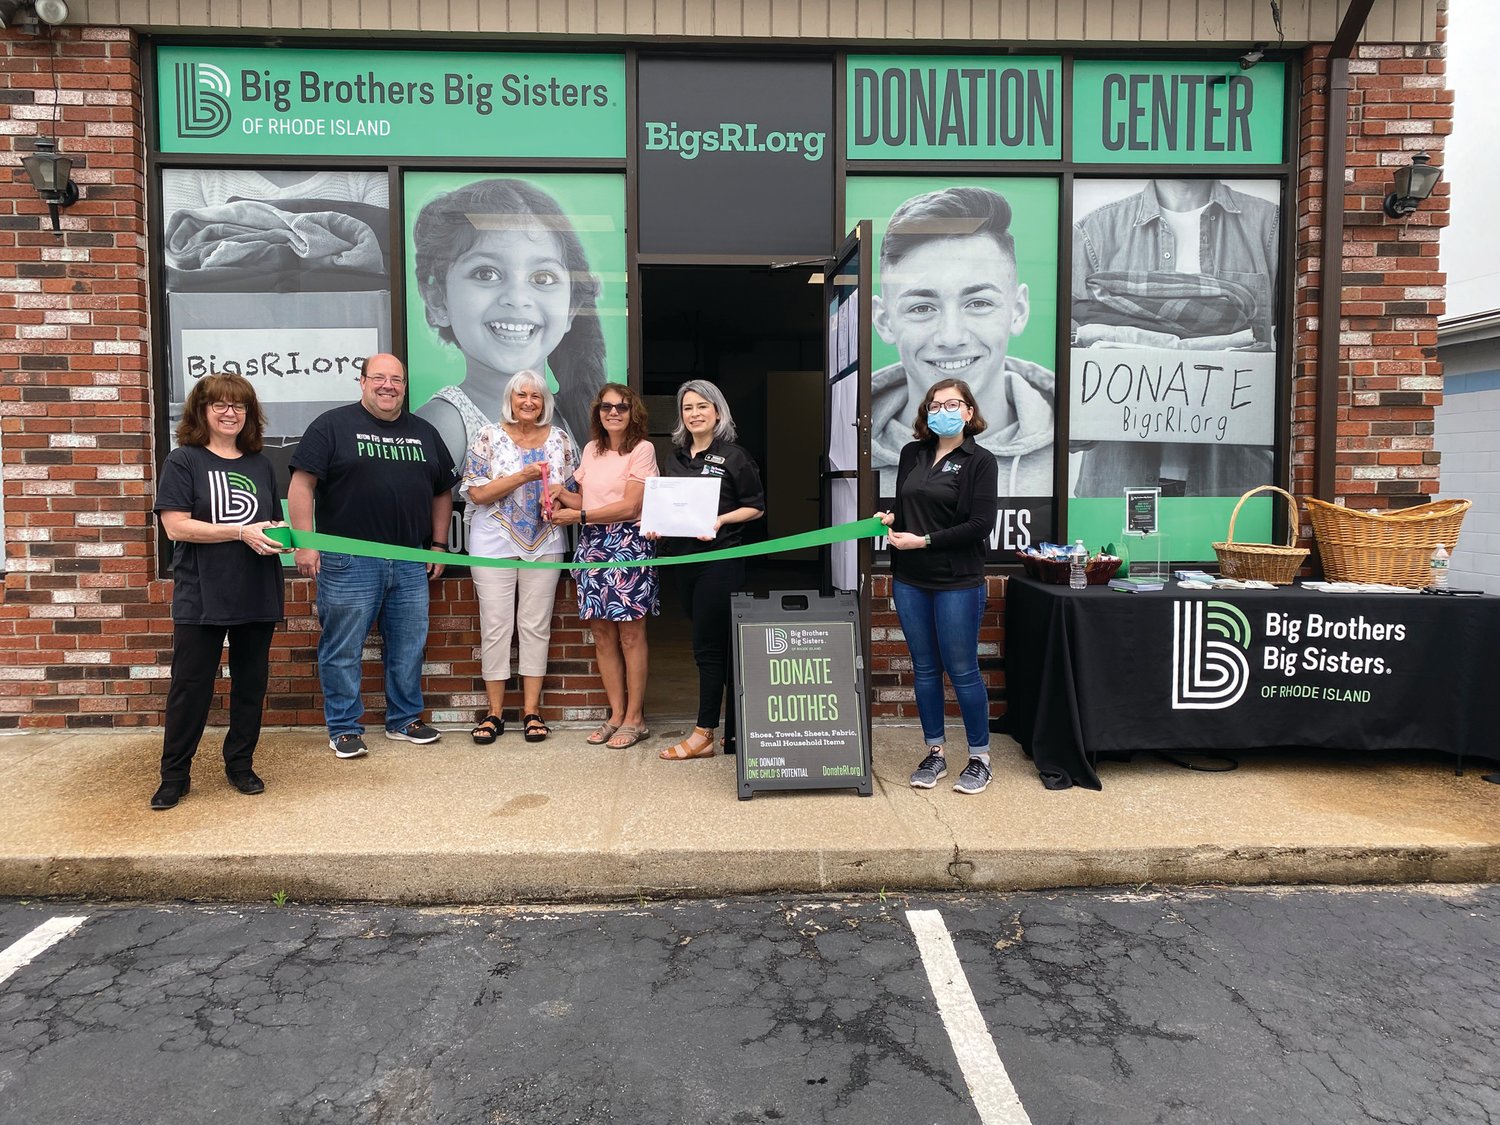 RIBBON SNIPPED: BBBSRI Chief Financial Officer Jack Blatchford, Johnston state Rep. Deborah Fellela, and Johnston Town Councilwoman Lauren Garzone attended the ribbon-cutting for a new donation center at 629 Killingly St. in Johnston.